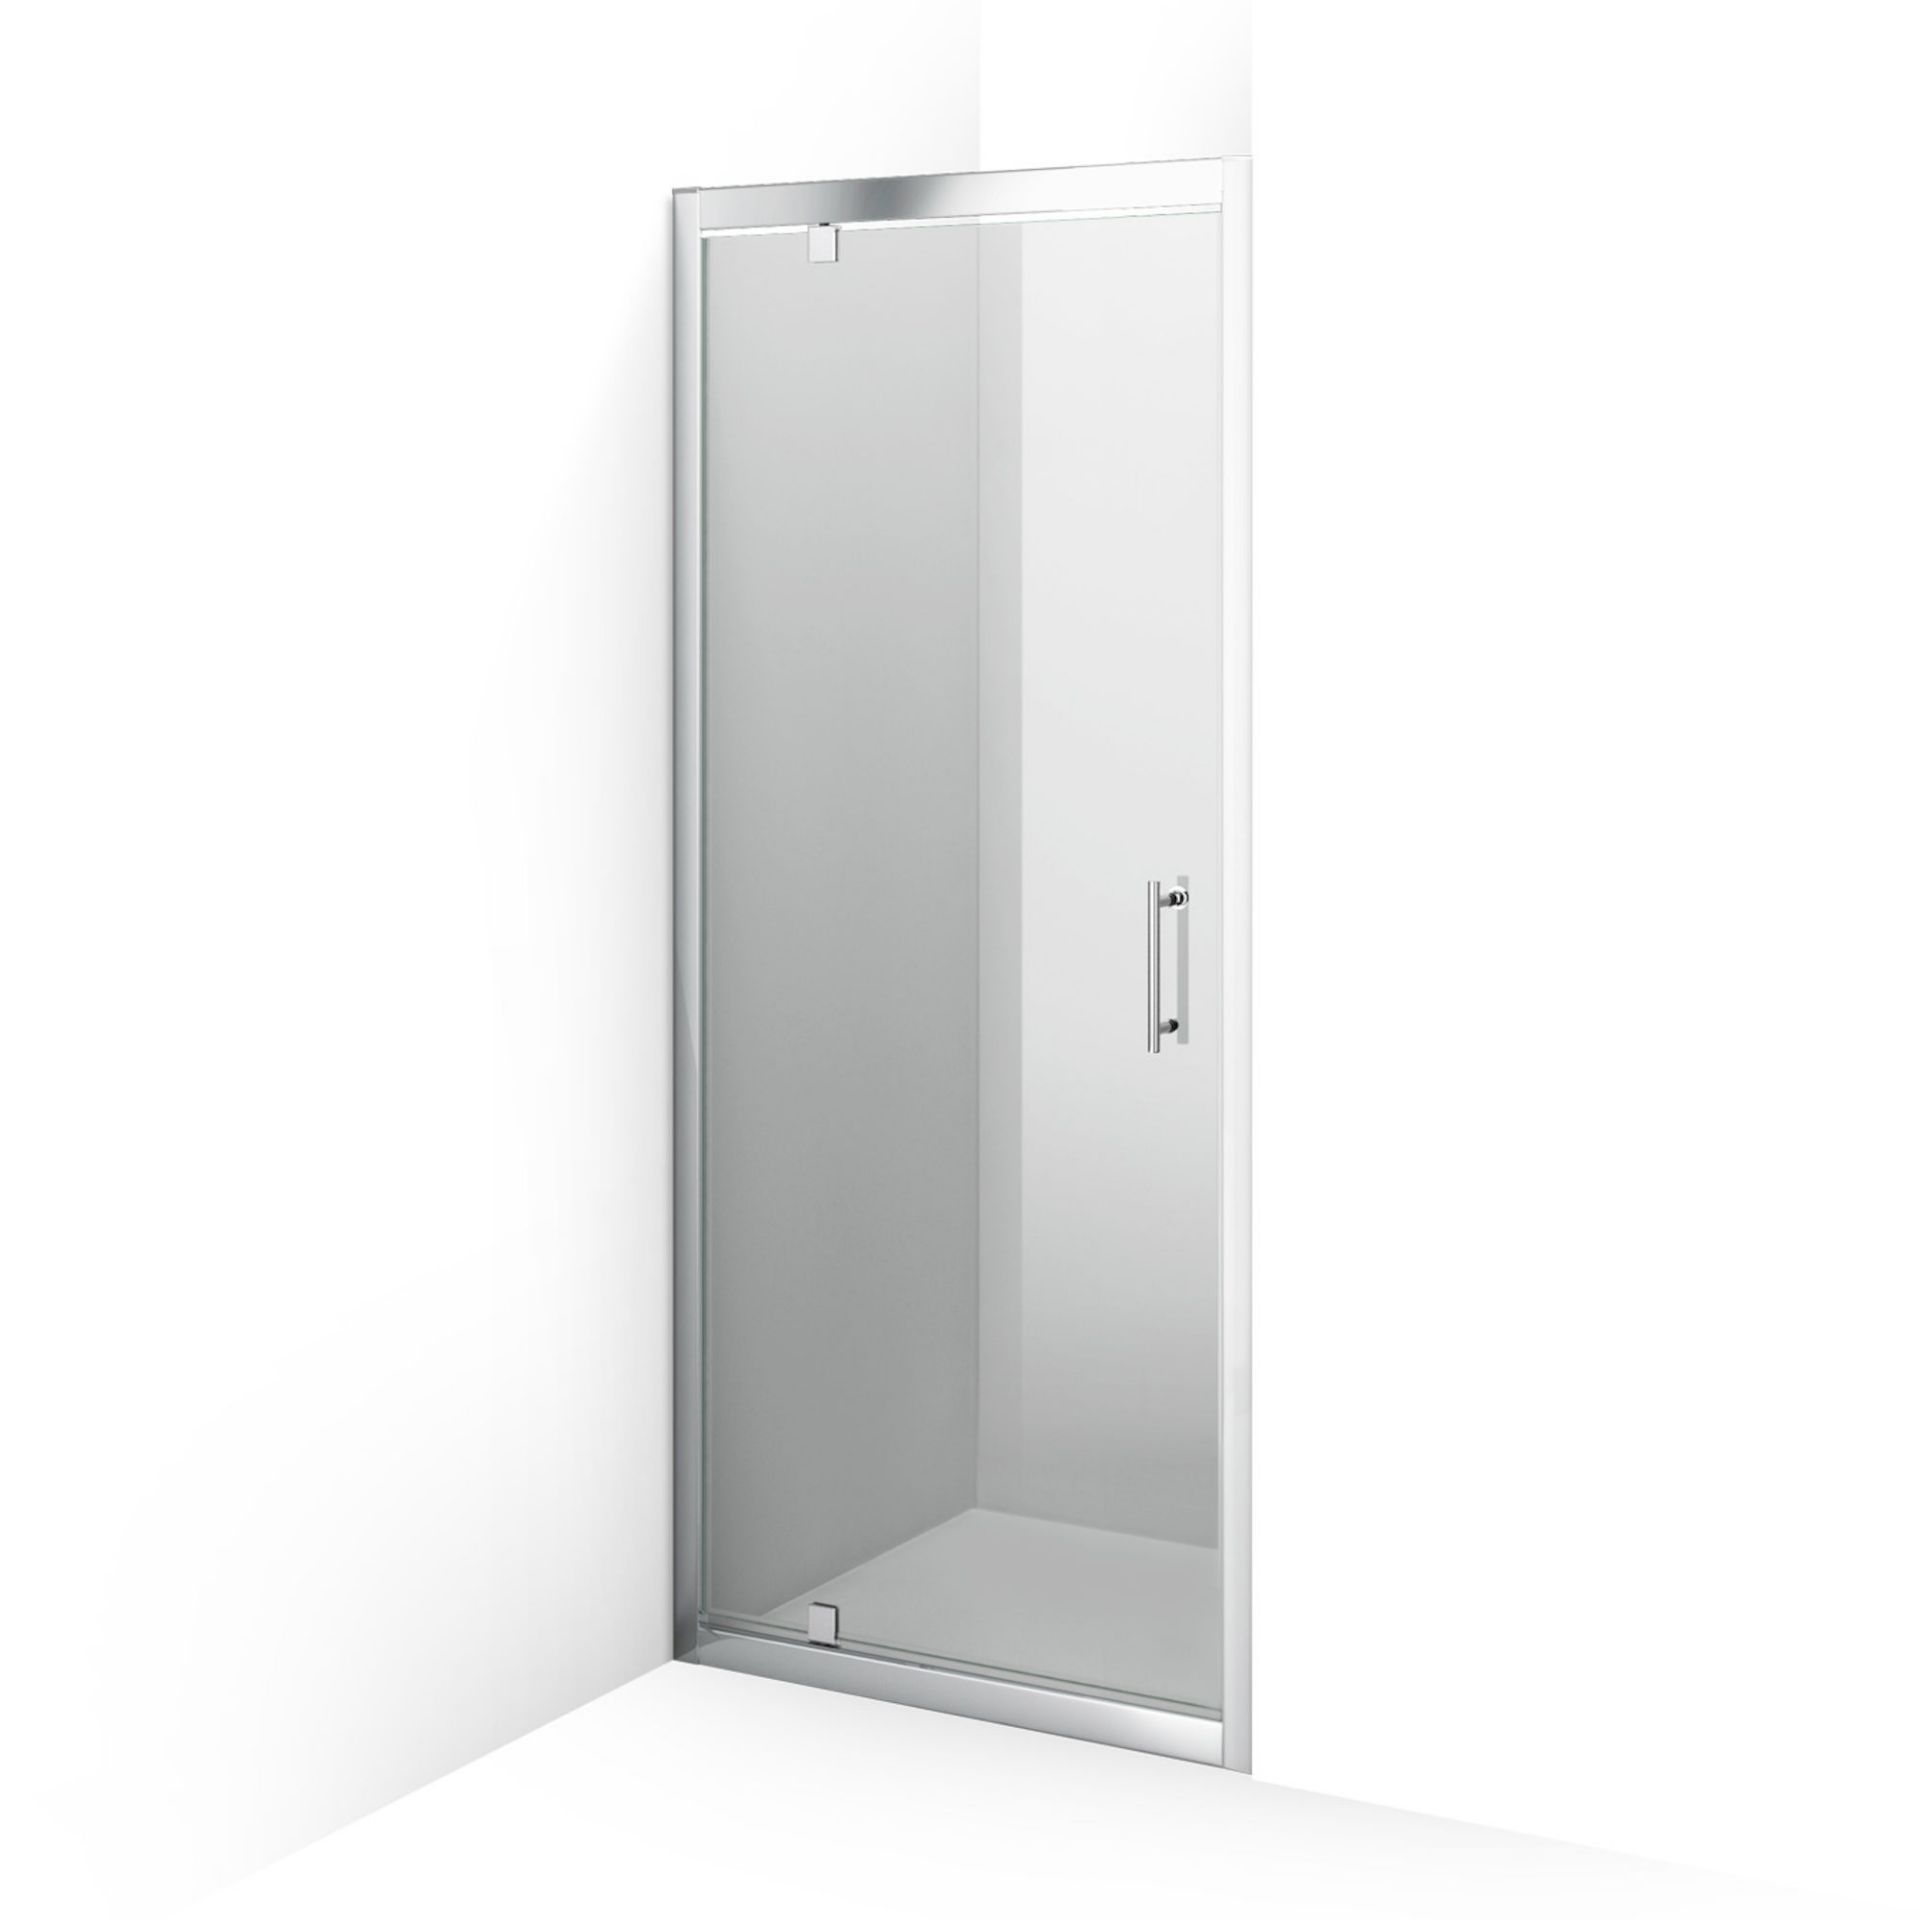 (AD30) 760mm 6mm - Elements Pivot Shower Door. RRP £299.99. 6mm Safety Glass Fully waterproof testet - Image 4 of 4